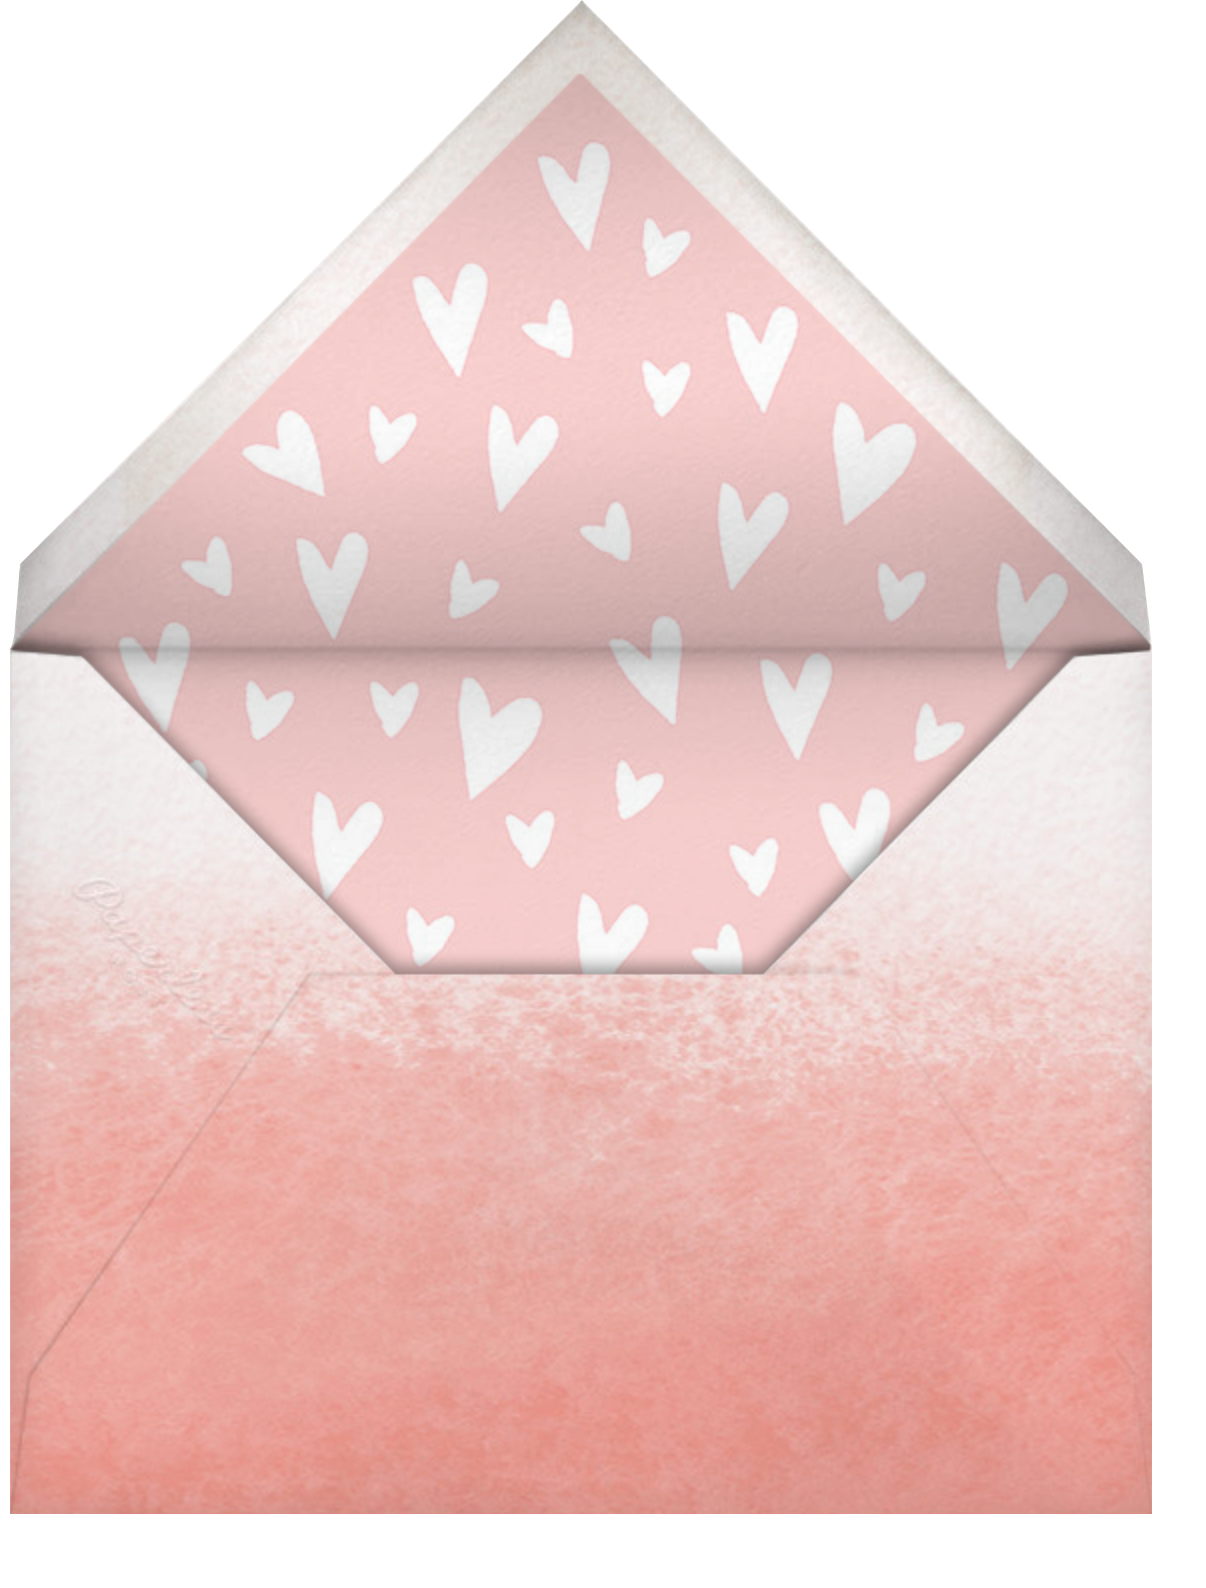 Main Attraction - Paperless Post - Envelope